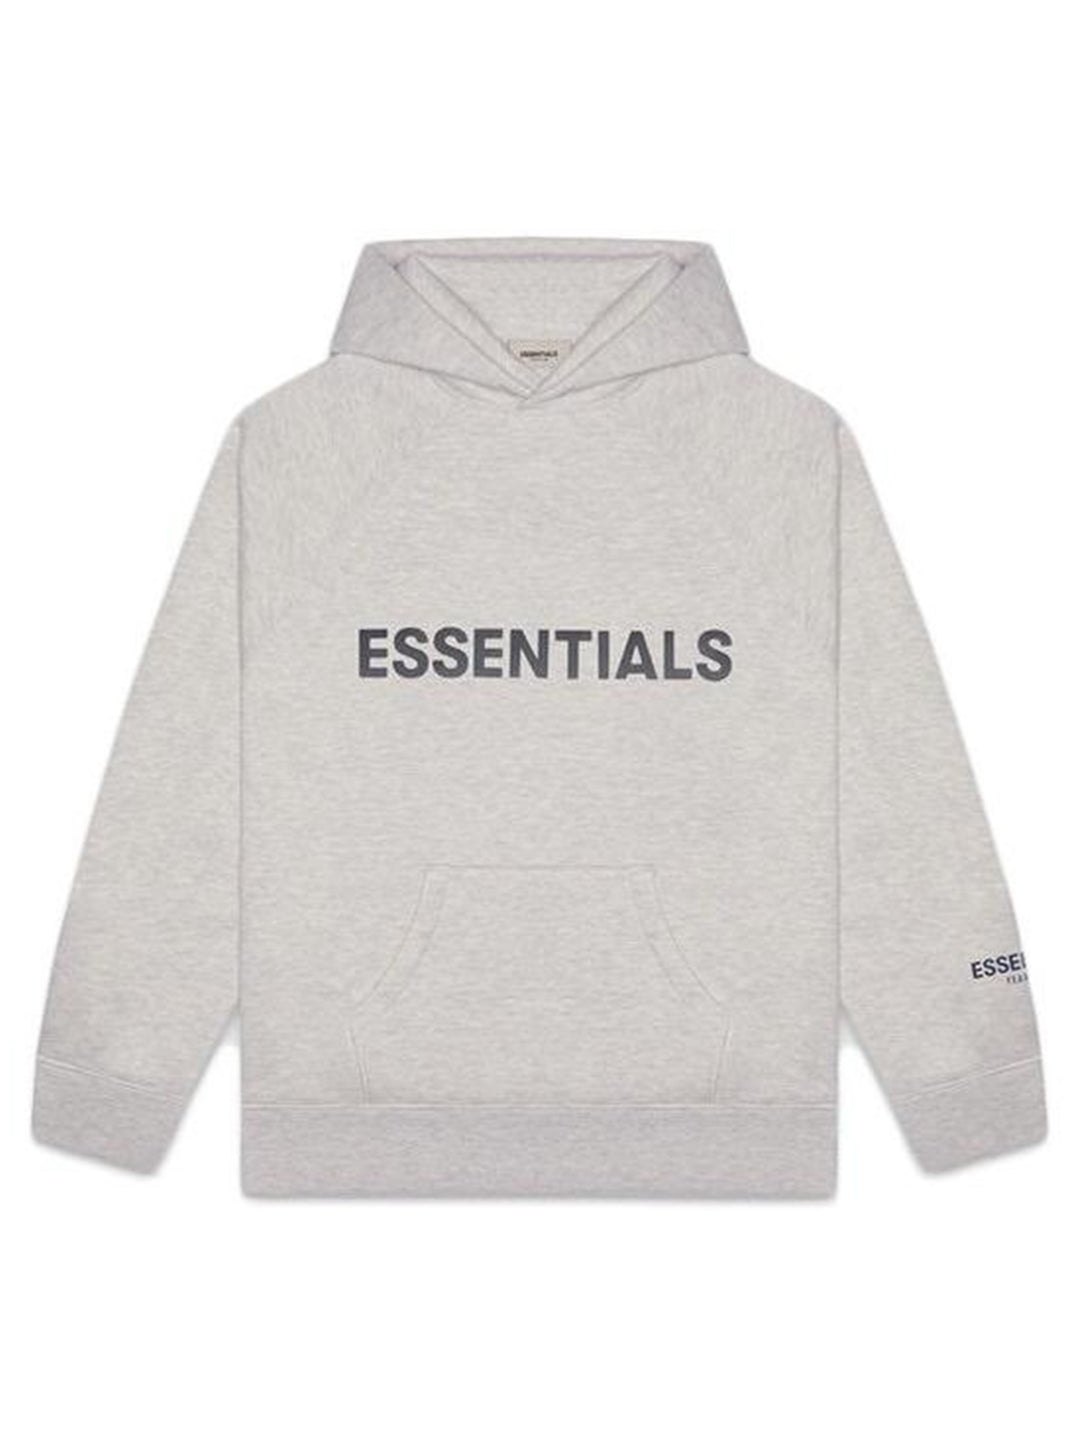 Fear Of God Essentials Pullover Hoodie Heather Oatmeal [FW20] Prior